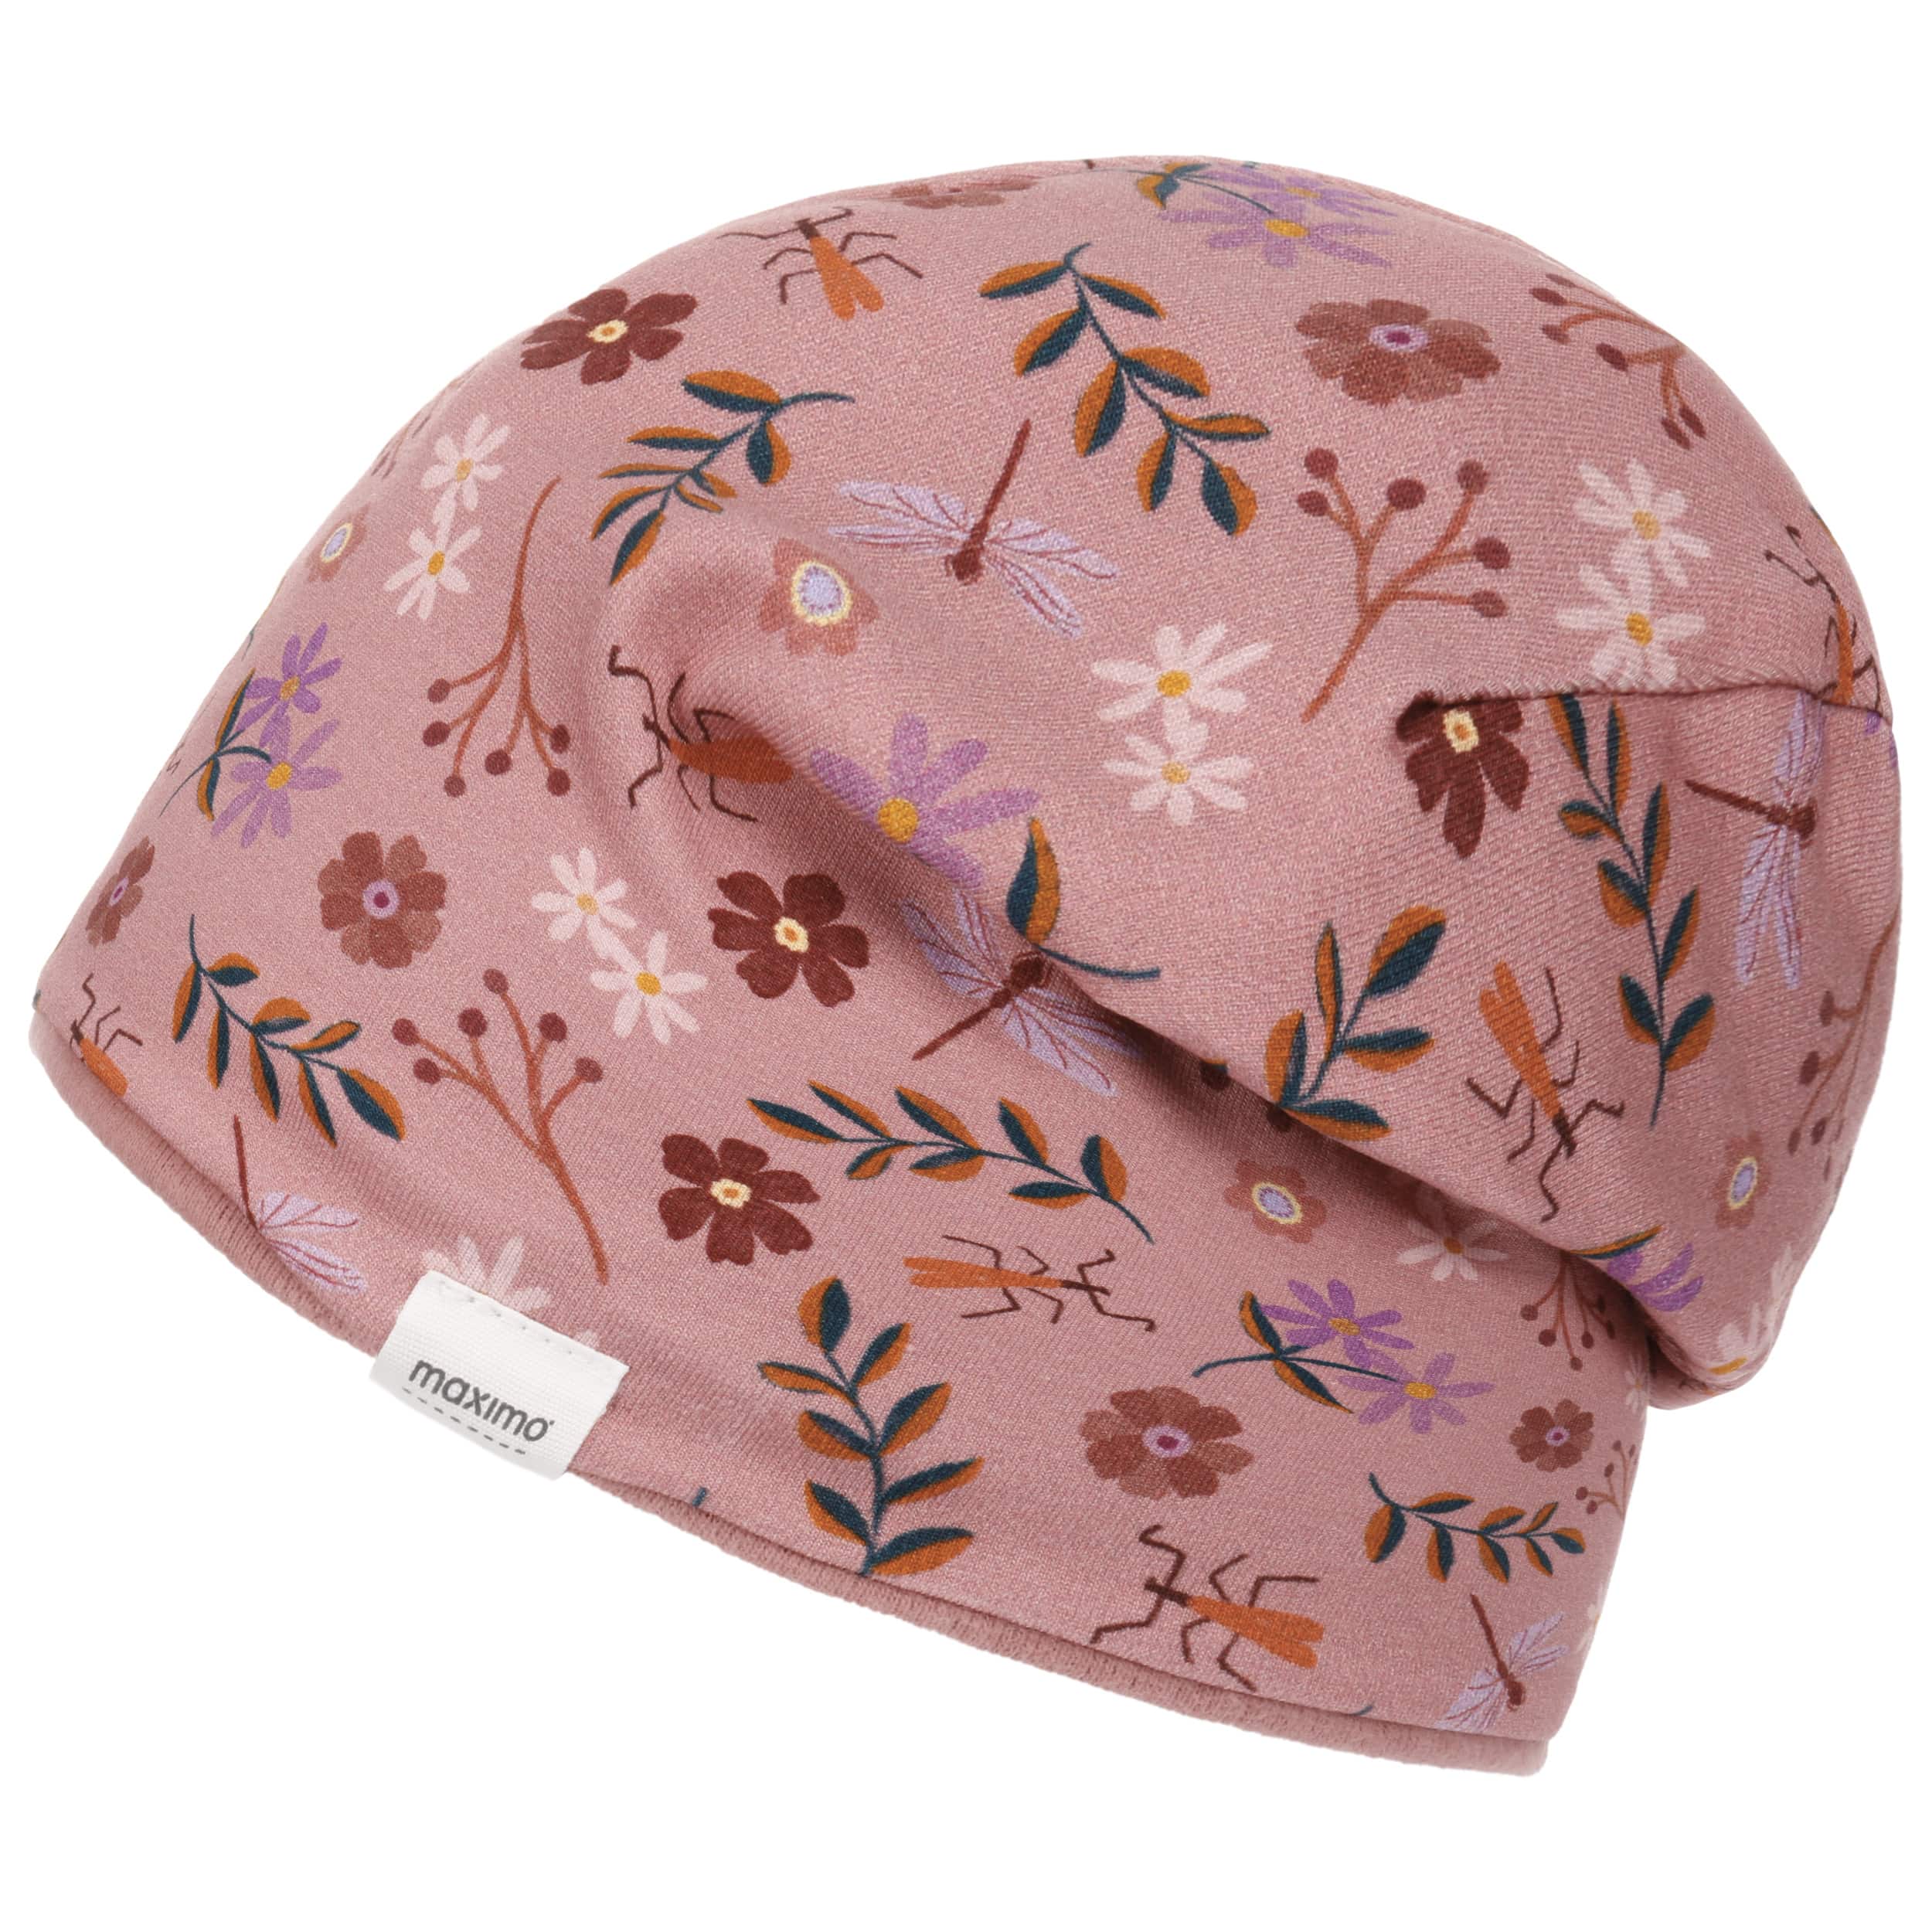 Girls Allover 22,95 CHF Beanie maximo by Flowers -